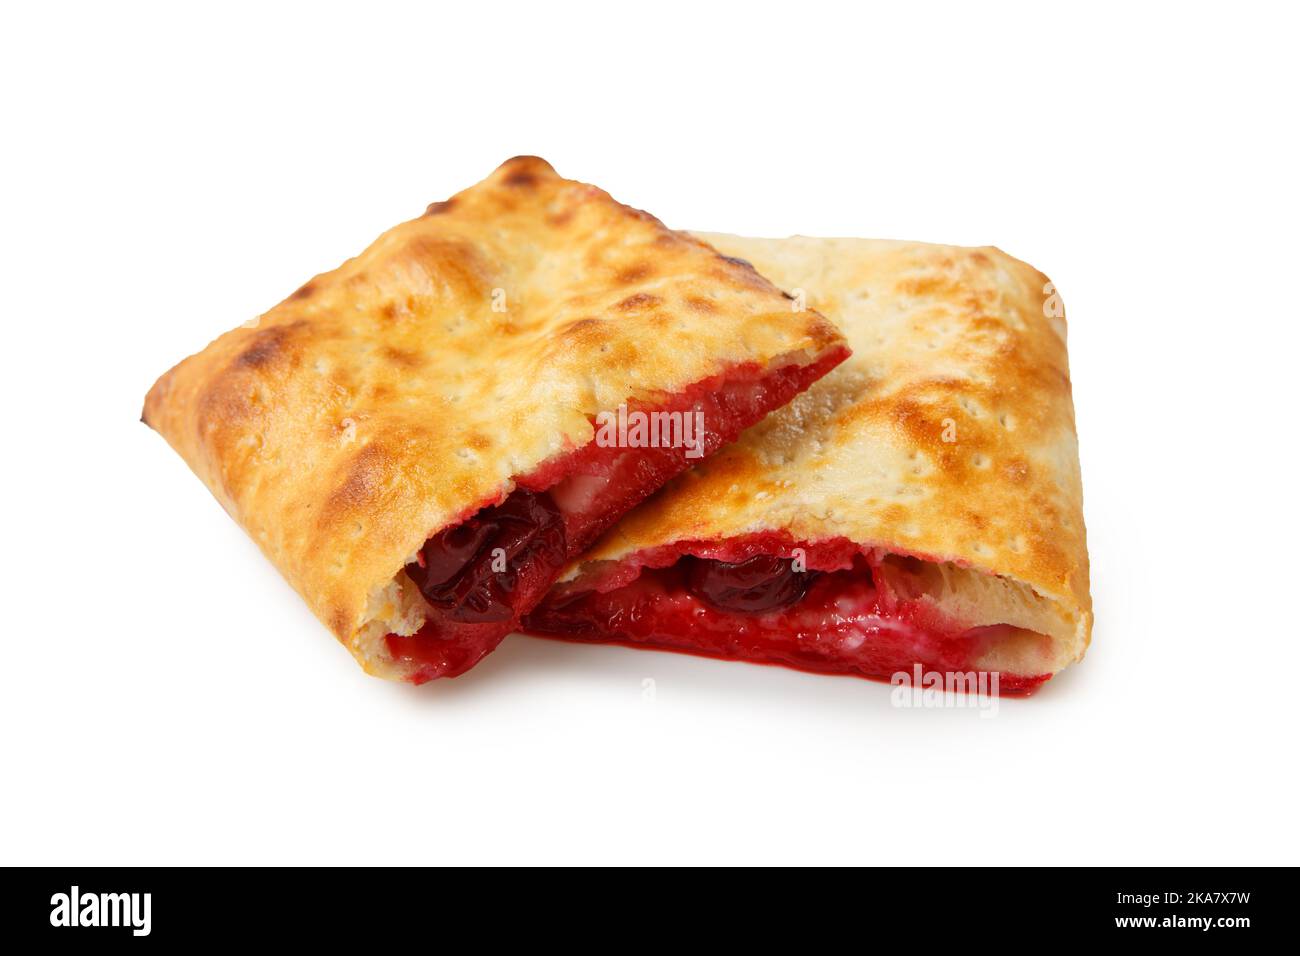 Food photography of desert pie with cherries and cream cheese isolated on white background. Stock Photo